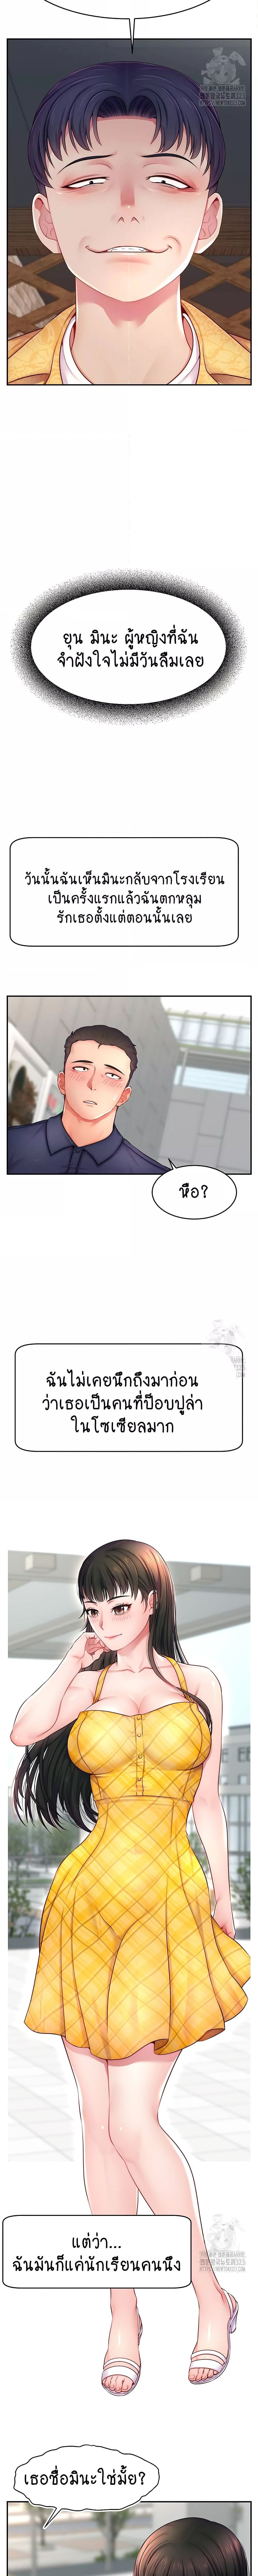 Making Friends With Streamers by Hacking! ตอนที่ 10 ภาพ 6